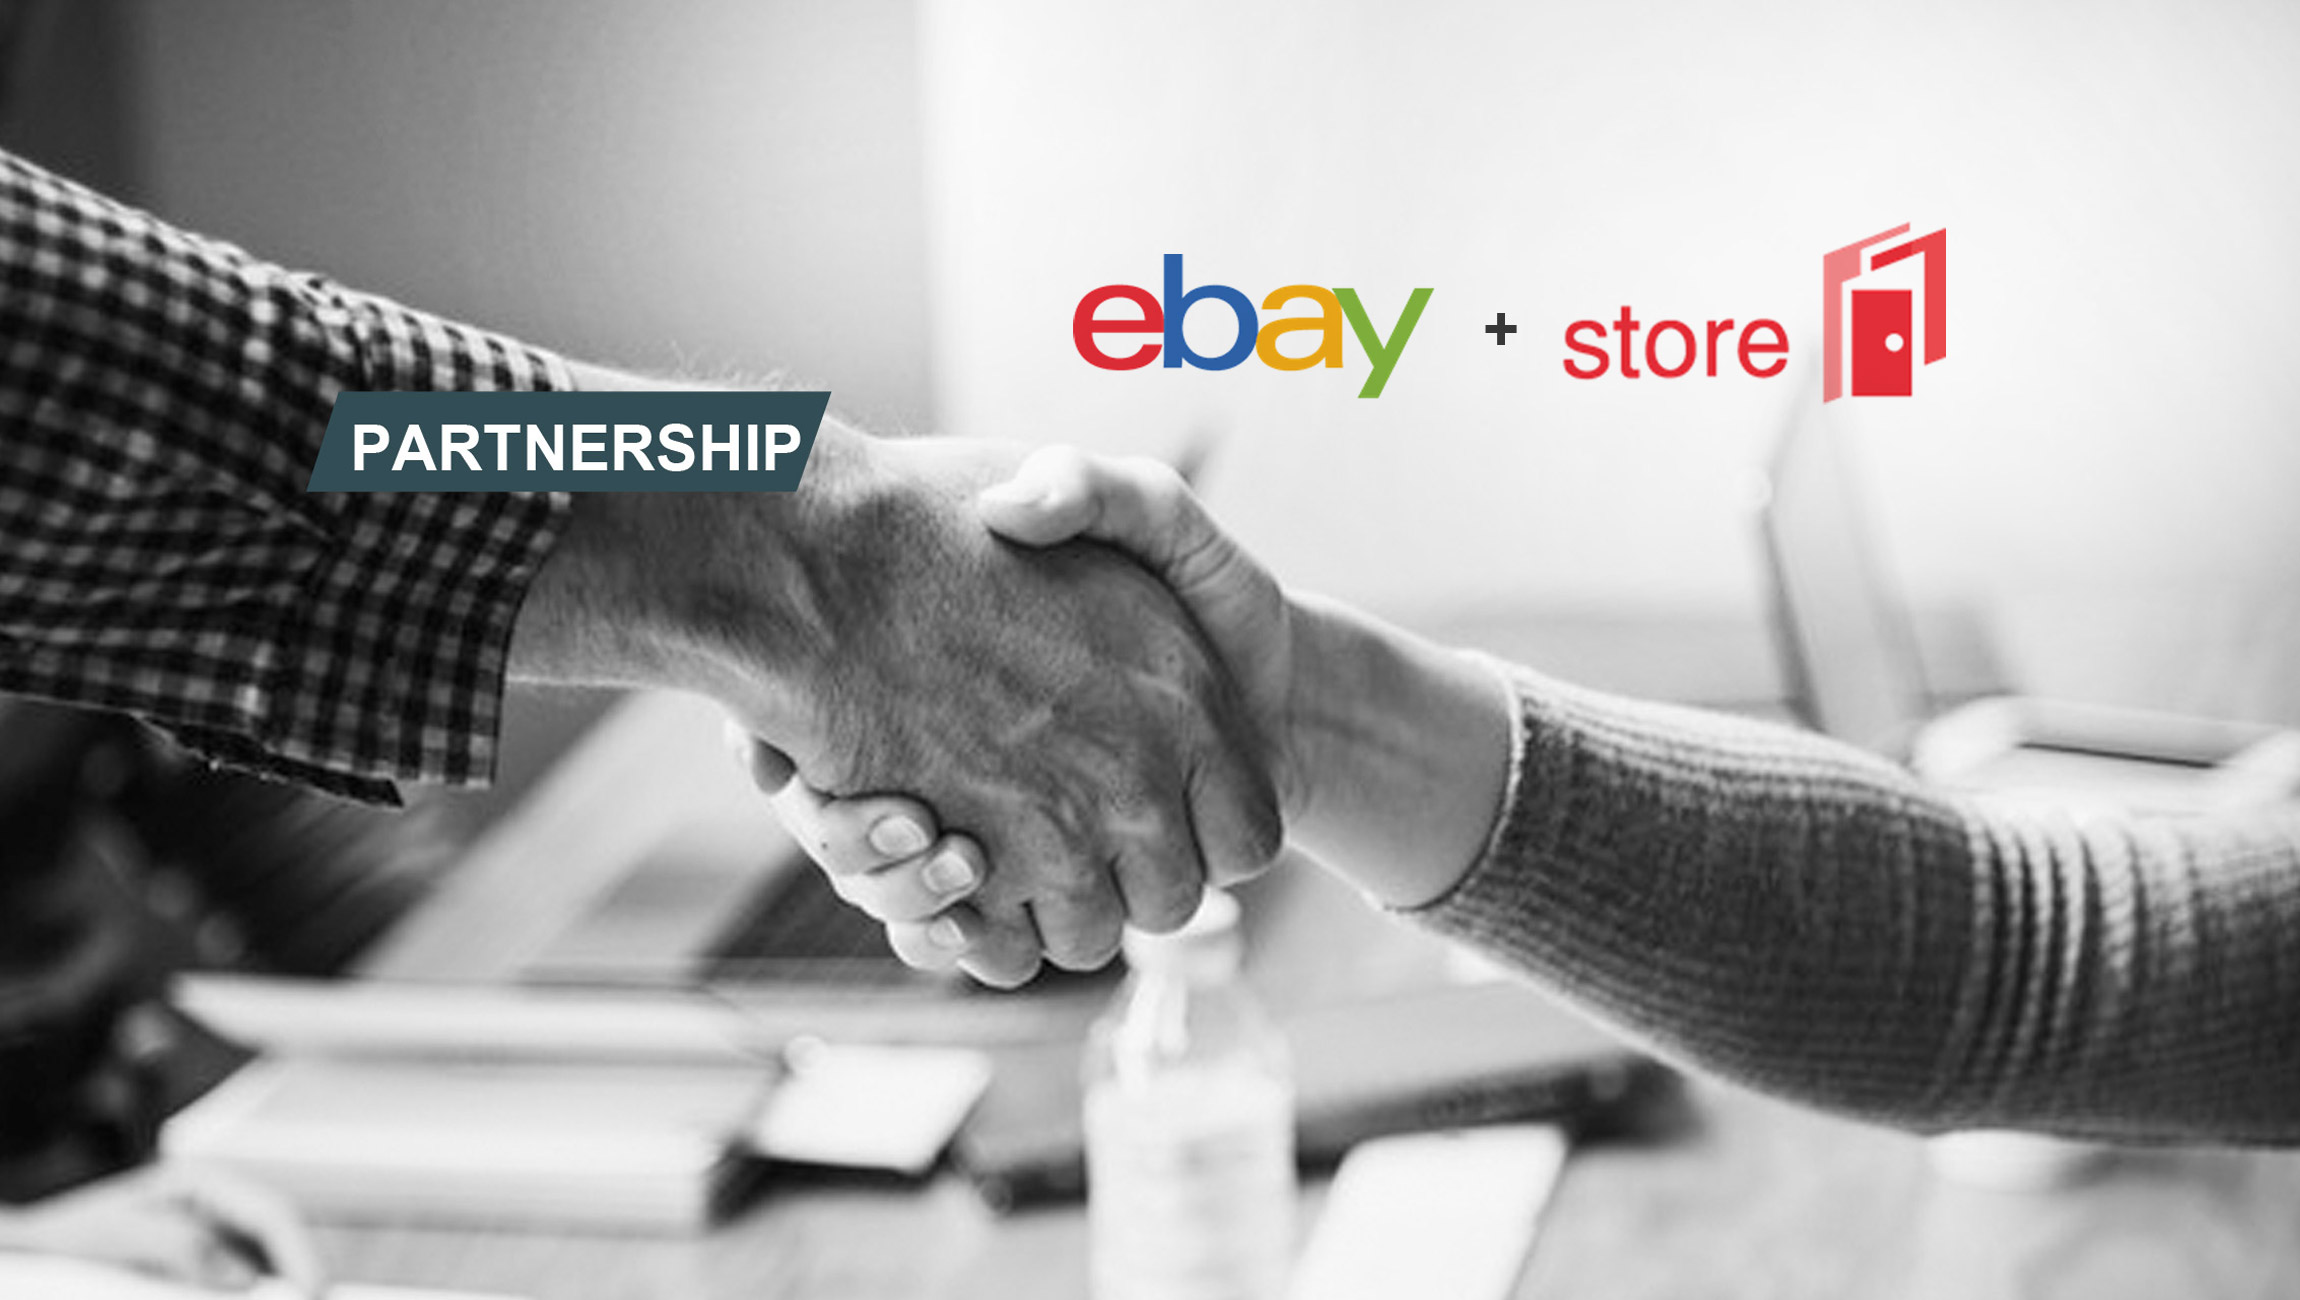 eBay-and-StoreON®-Announce-Partnership-for-More-Than-2-Million-Latin-American-Sellers-to-Export-Their-Products-to-the-U.S.